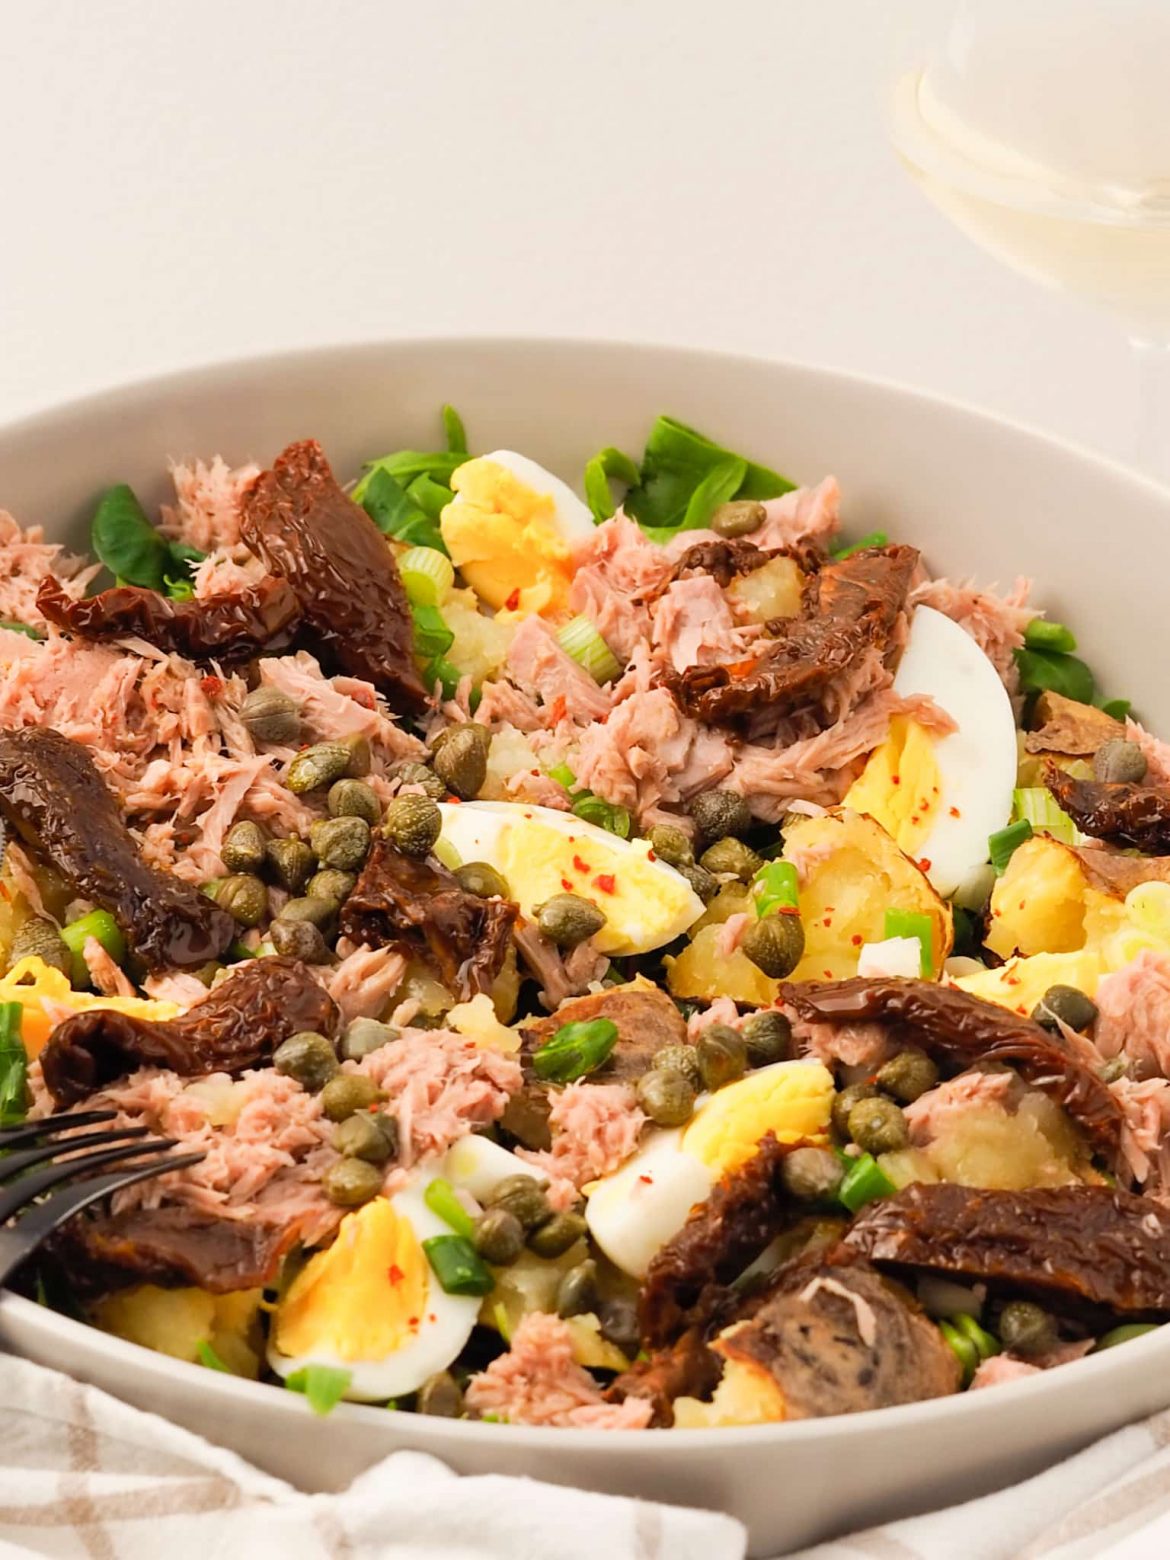 Country Tuna Salad with Eggs and Potatoes